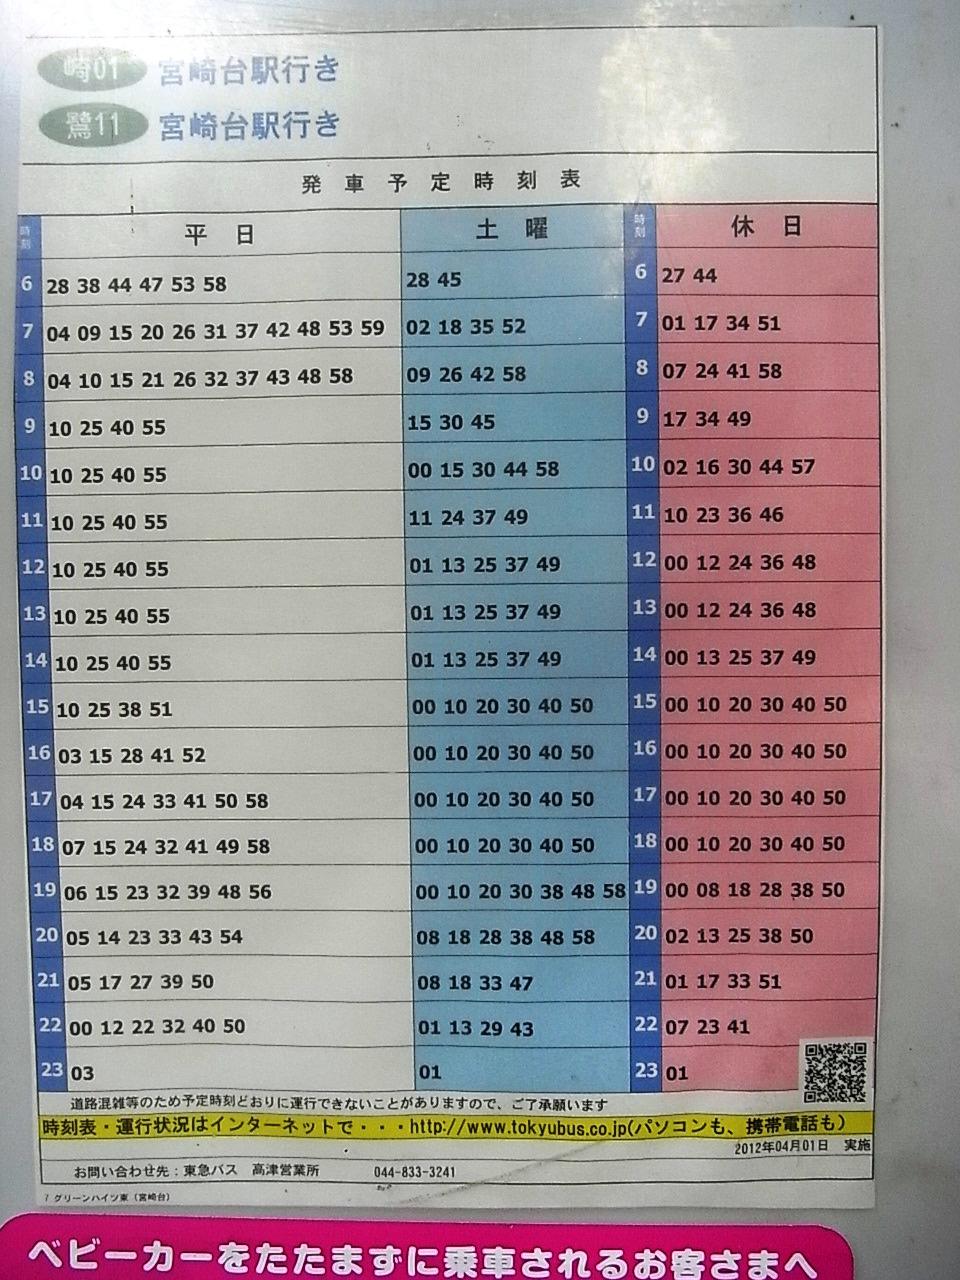 Other. Bus timetable